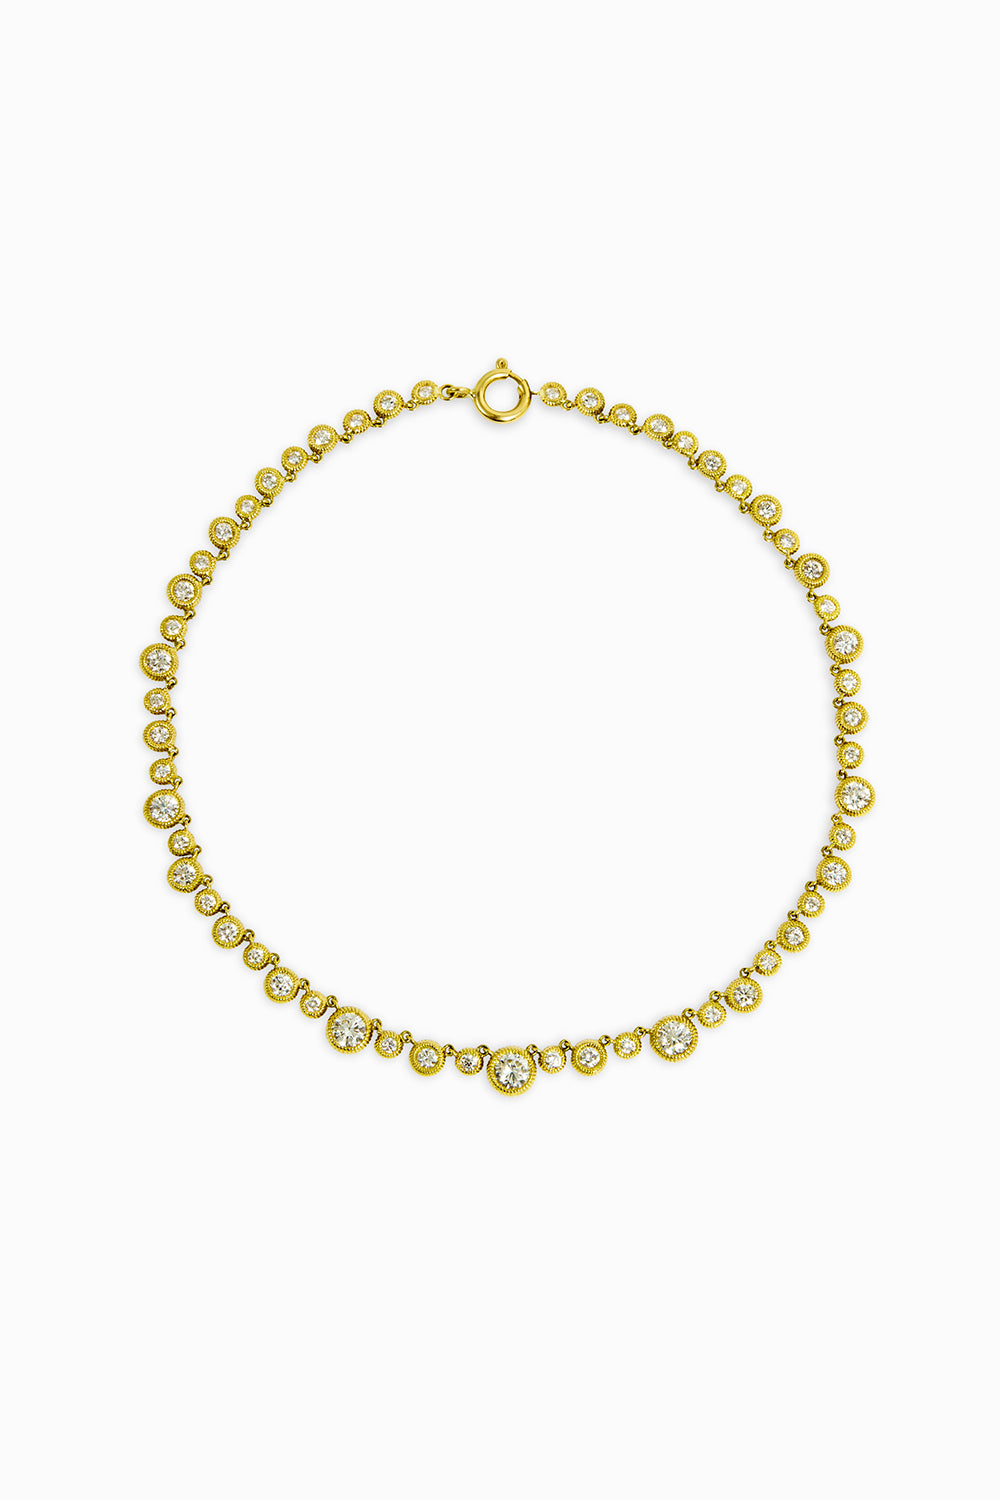 Cabo riviere necklace